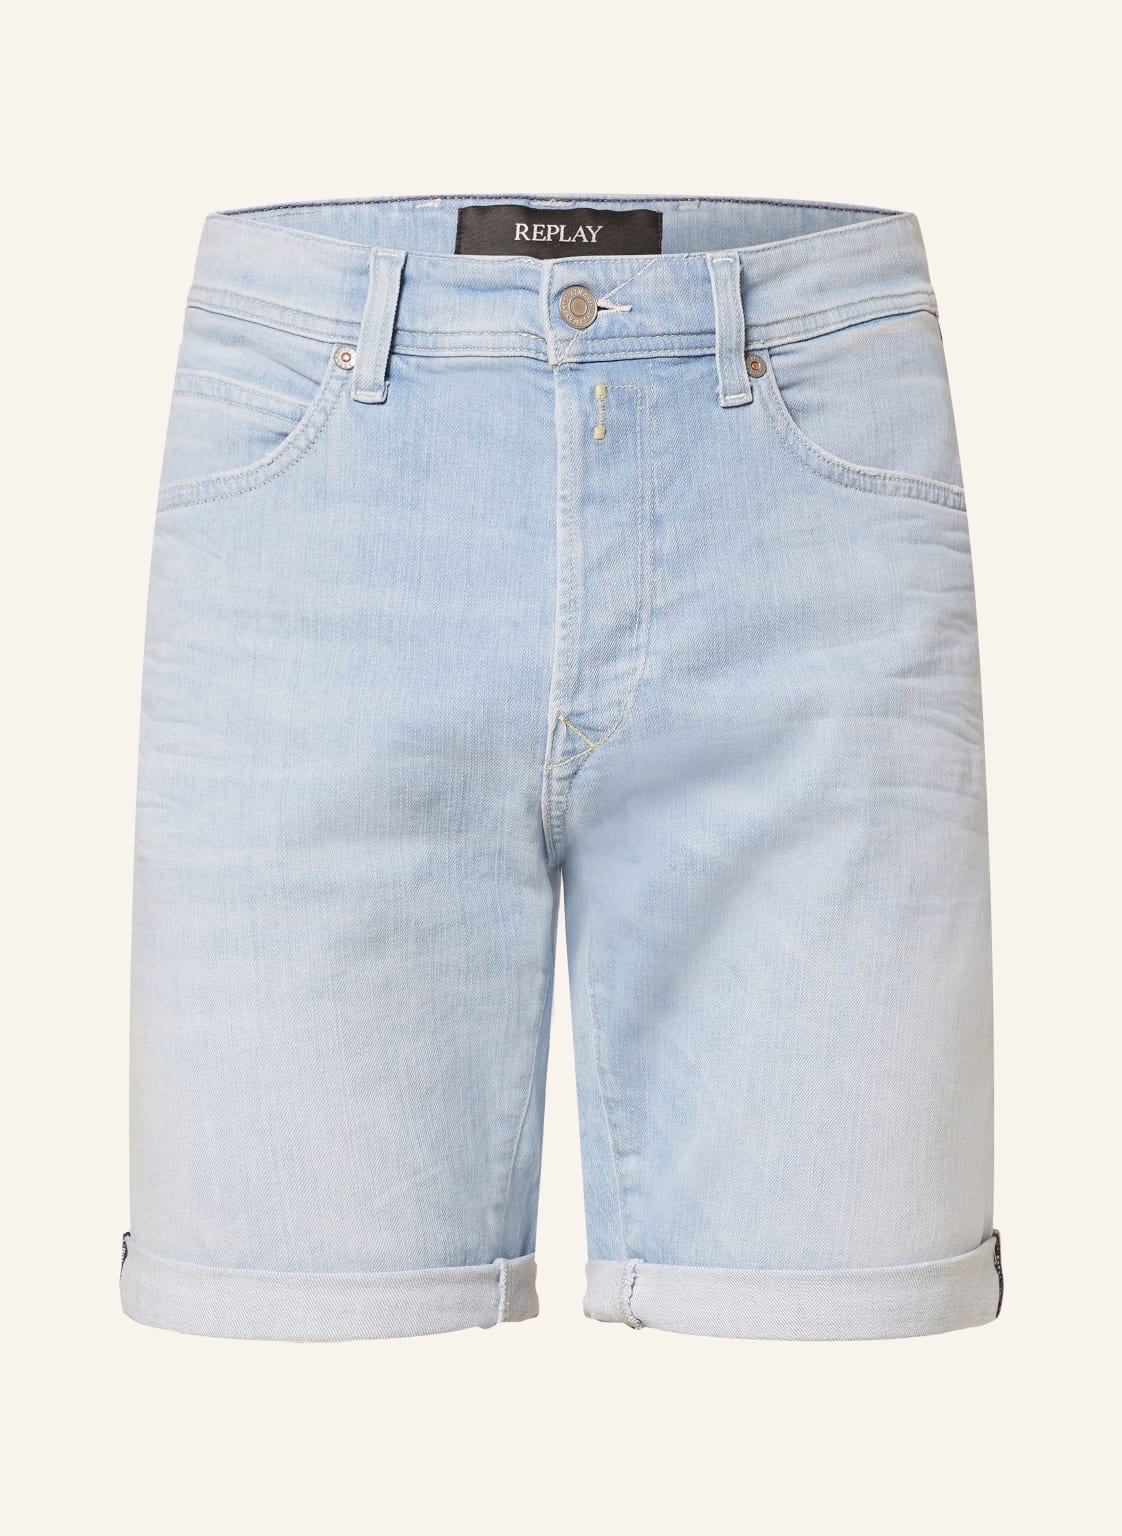 Replay Jeansshorts 573 Tapered Fit blau von Replay